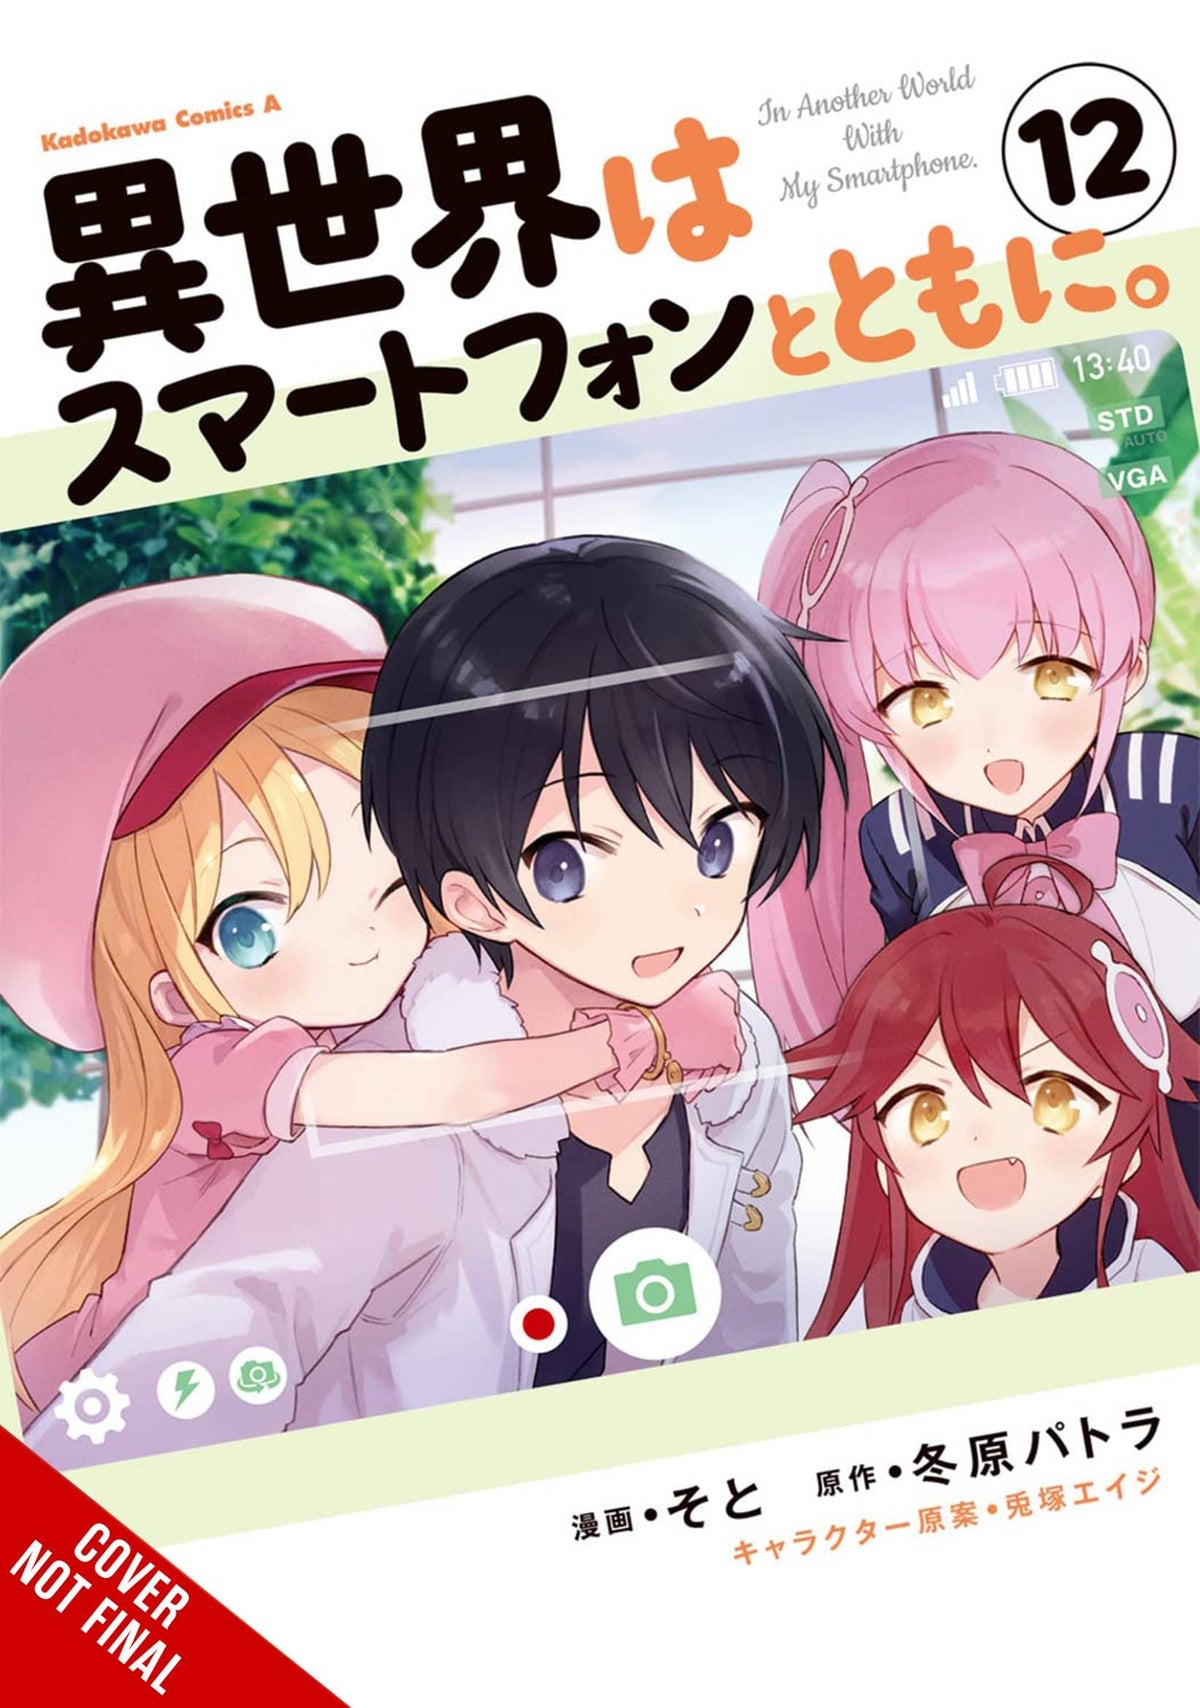 IN ANOTHER WORLD WITH MY SMARTPHONE GN VOL 12